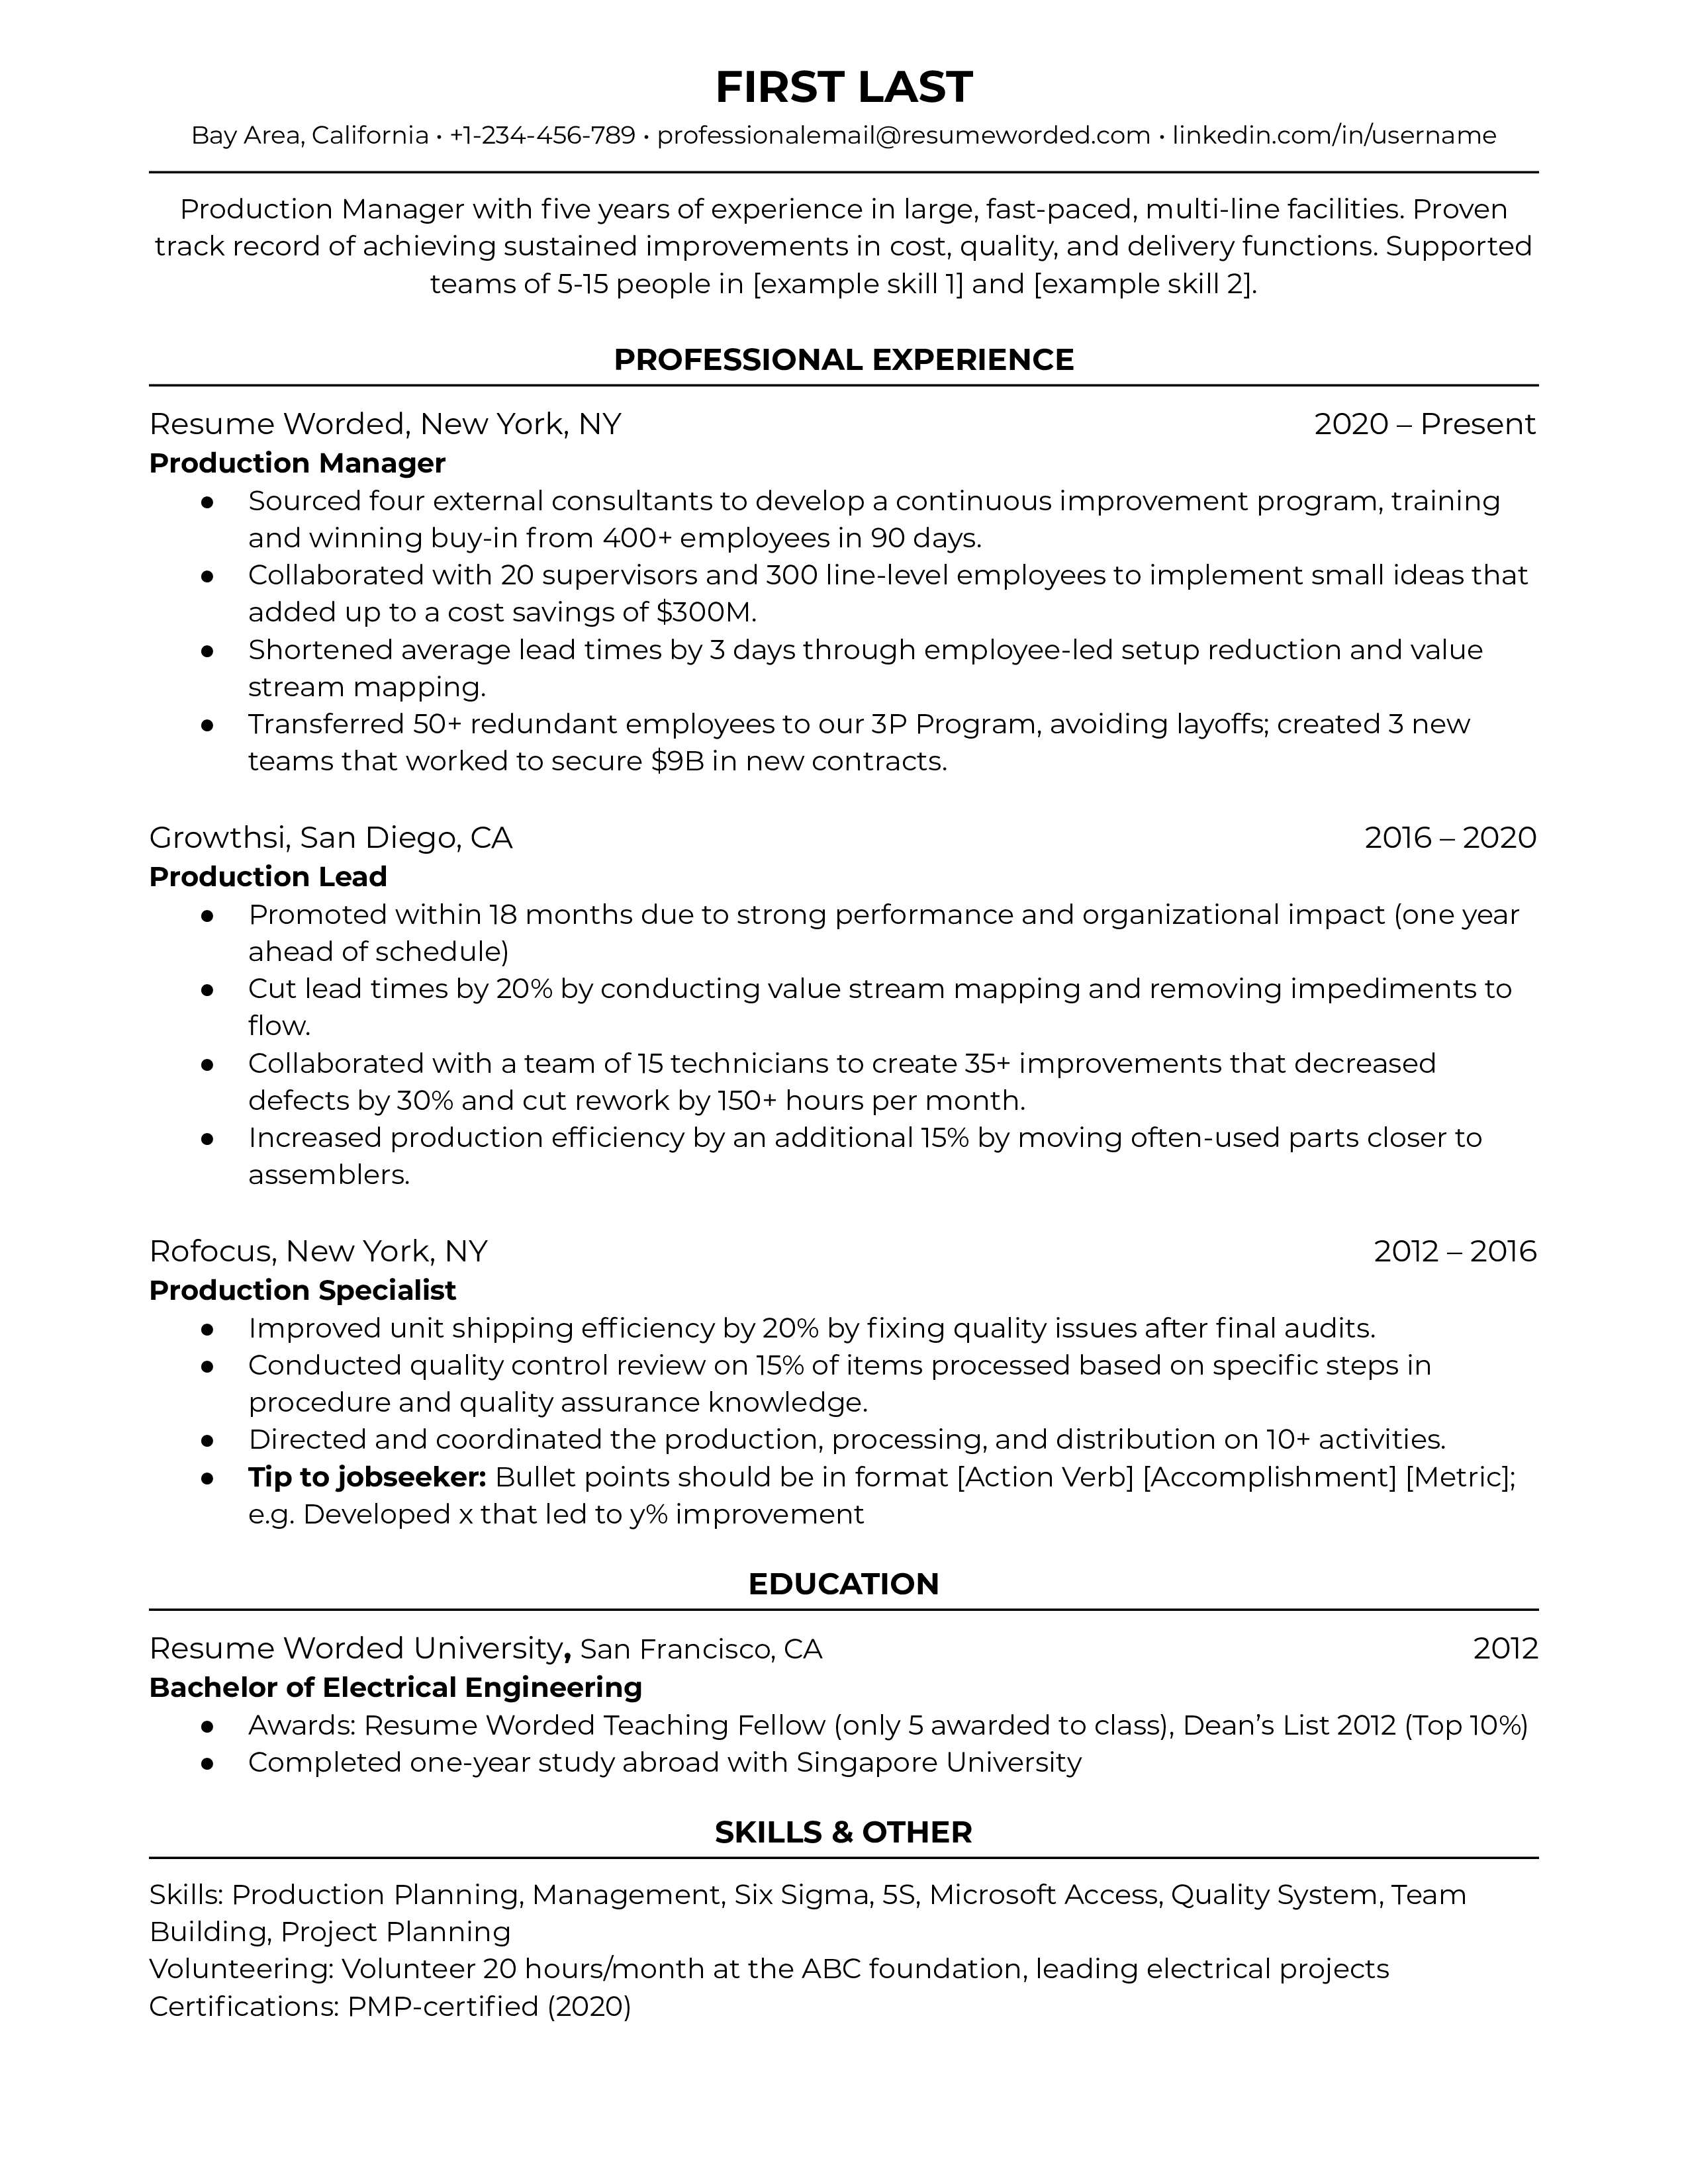 A CV for a production manager emphasizing lean management knowledge and leadership qualities.